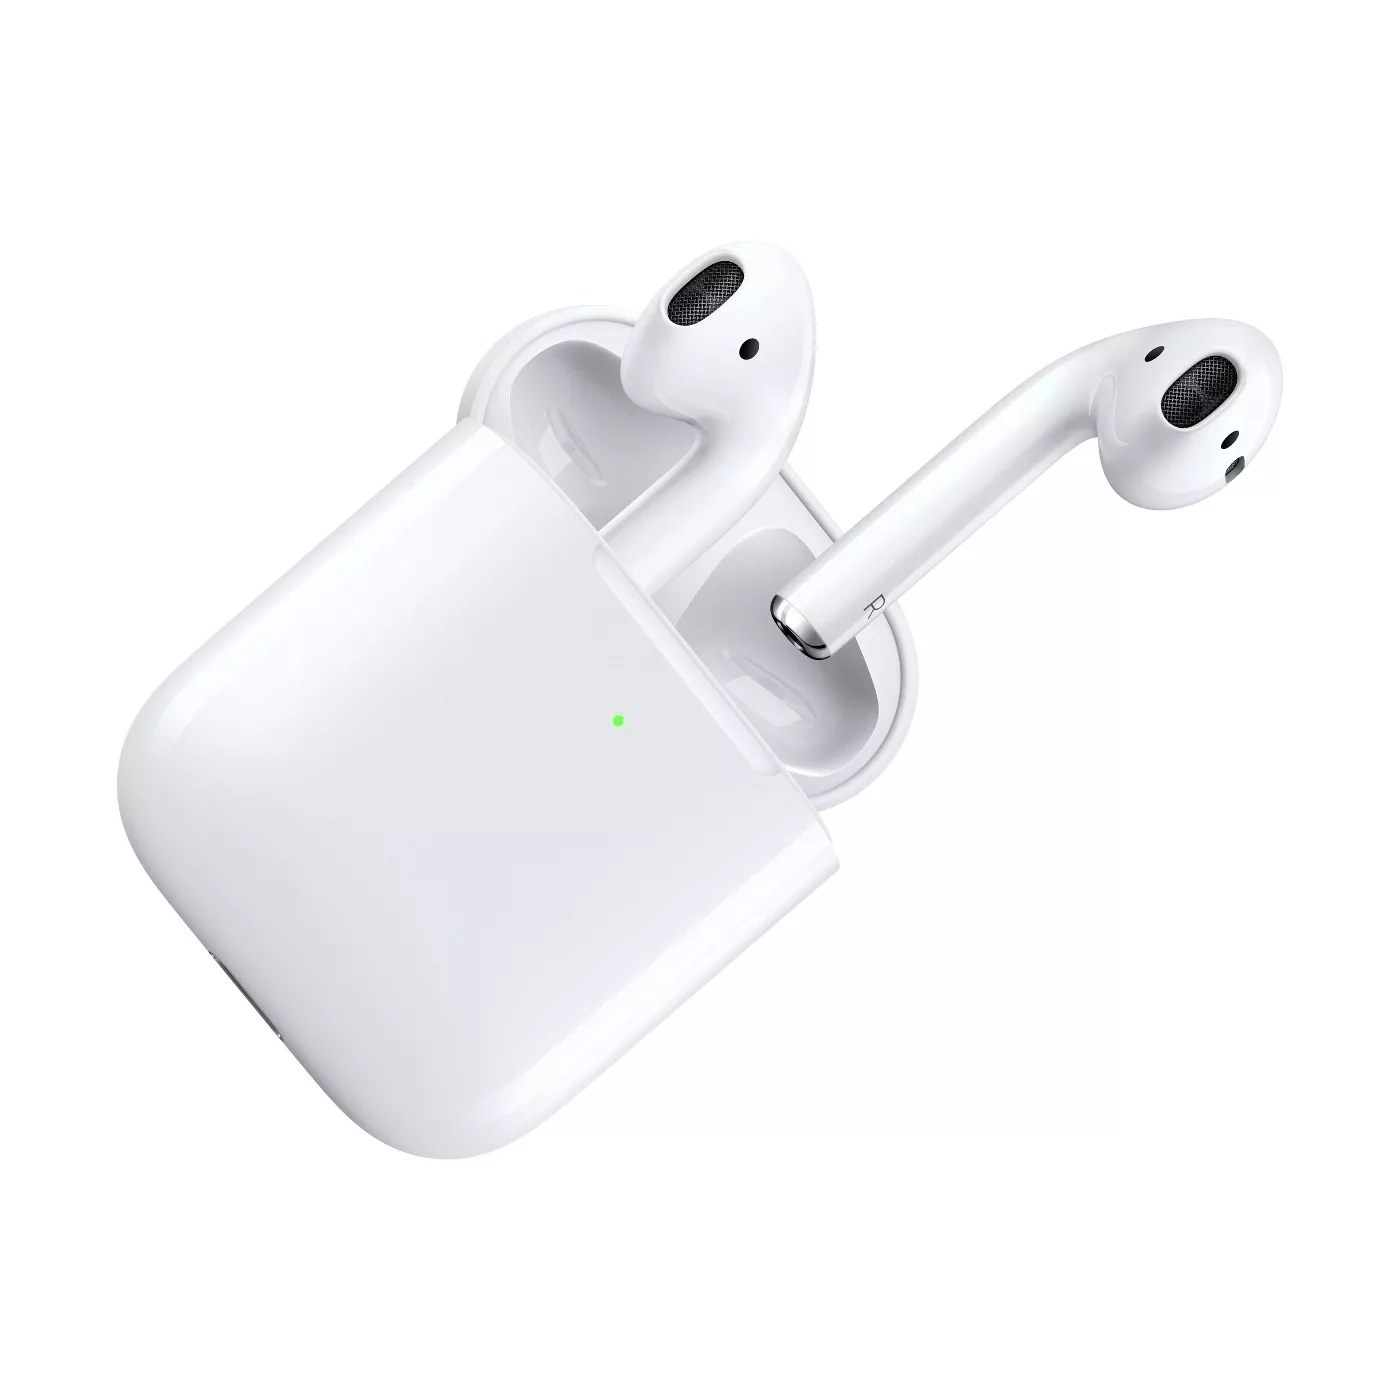 Apple AirPods and the case